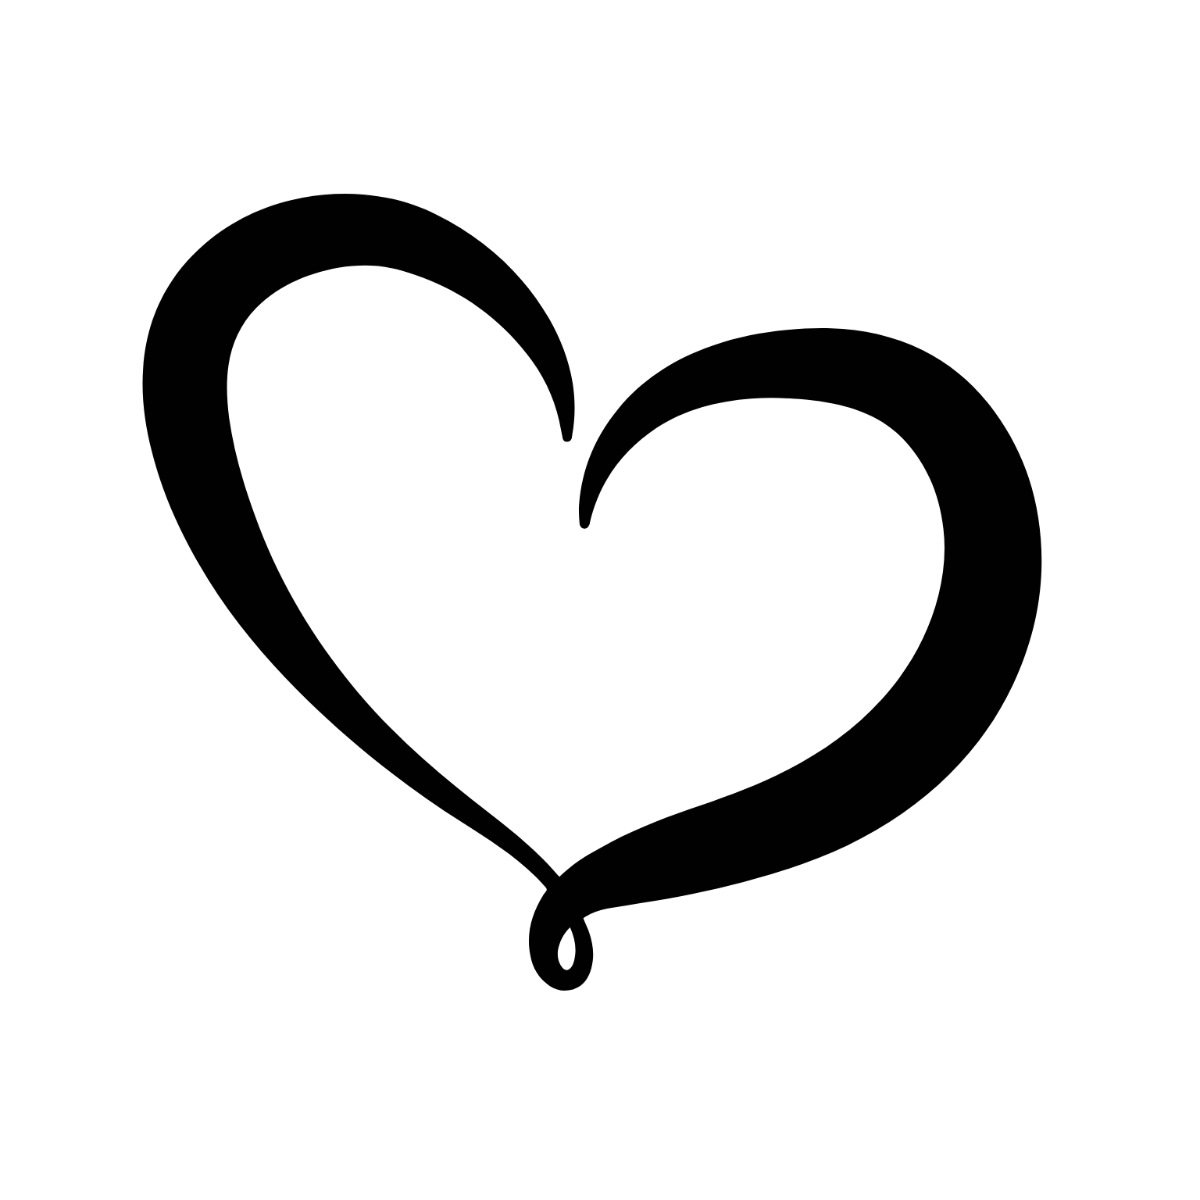 Decorative Heart Clipart Black and White Template